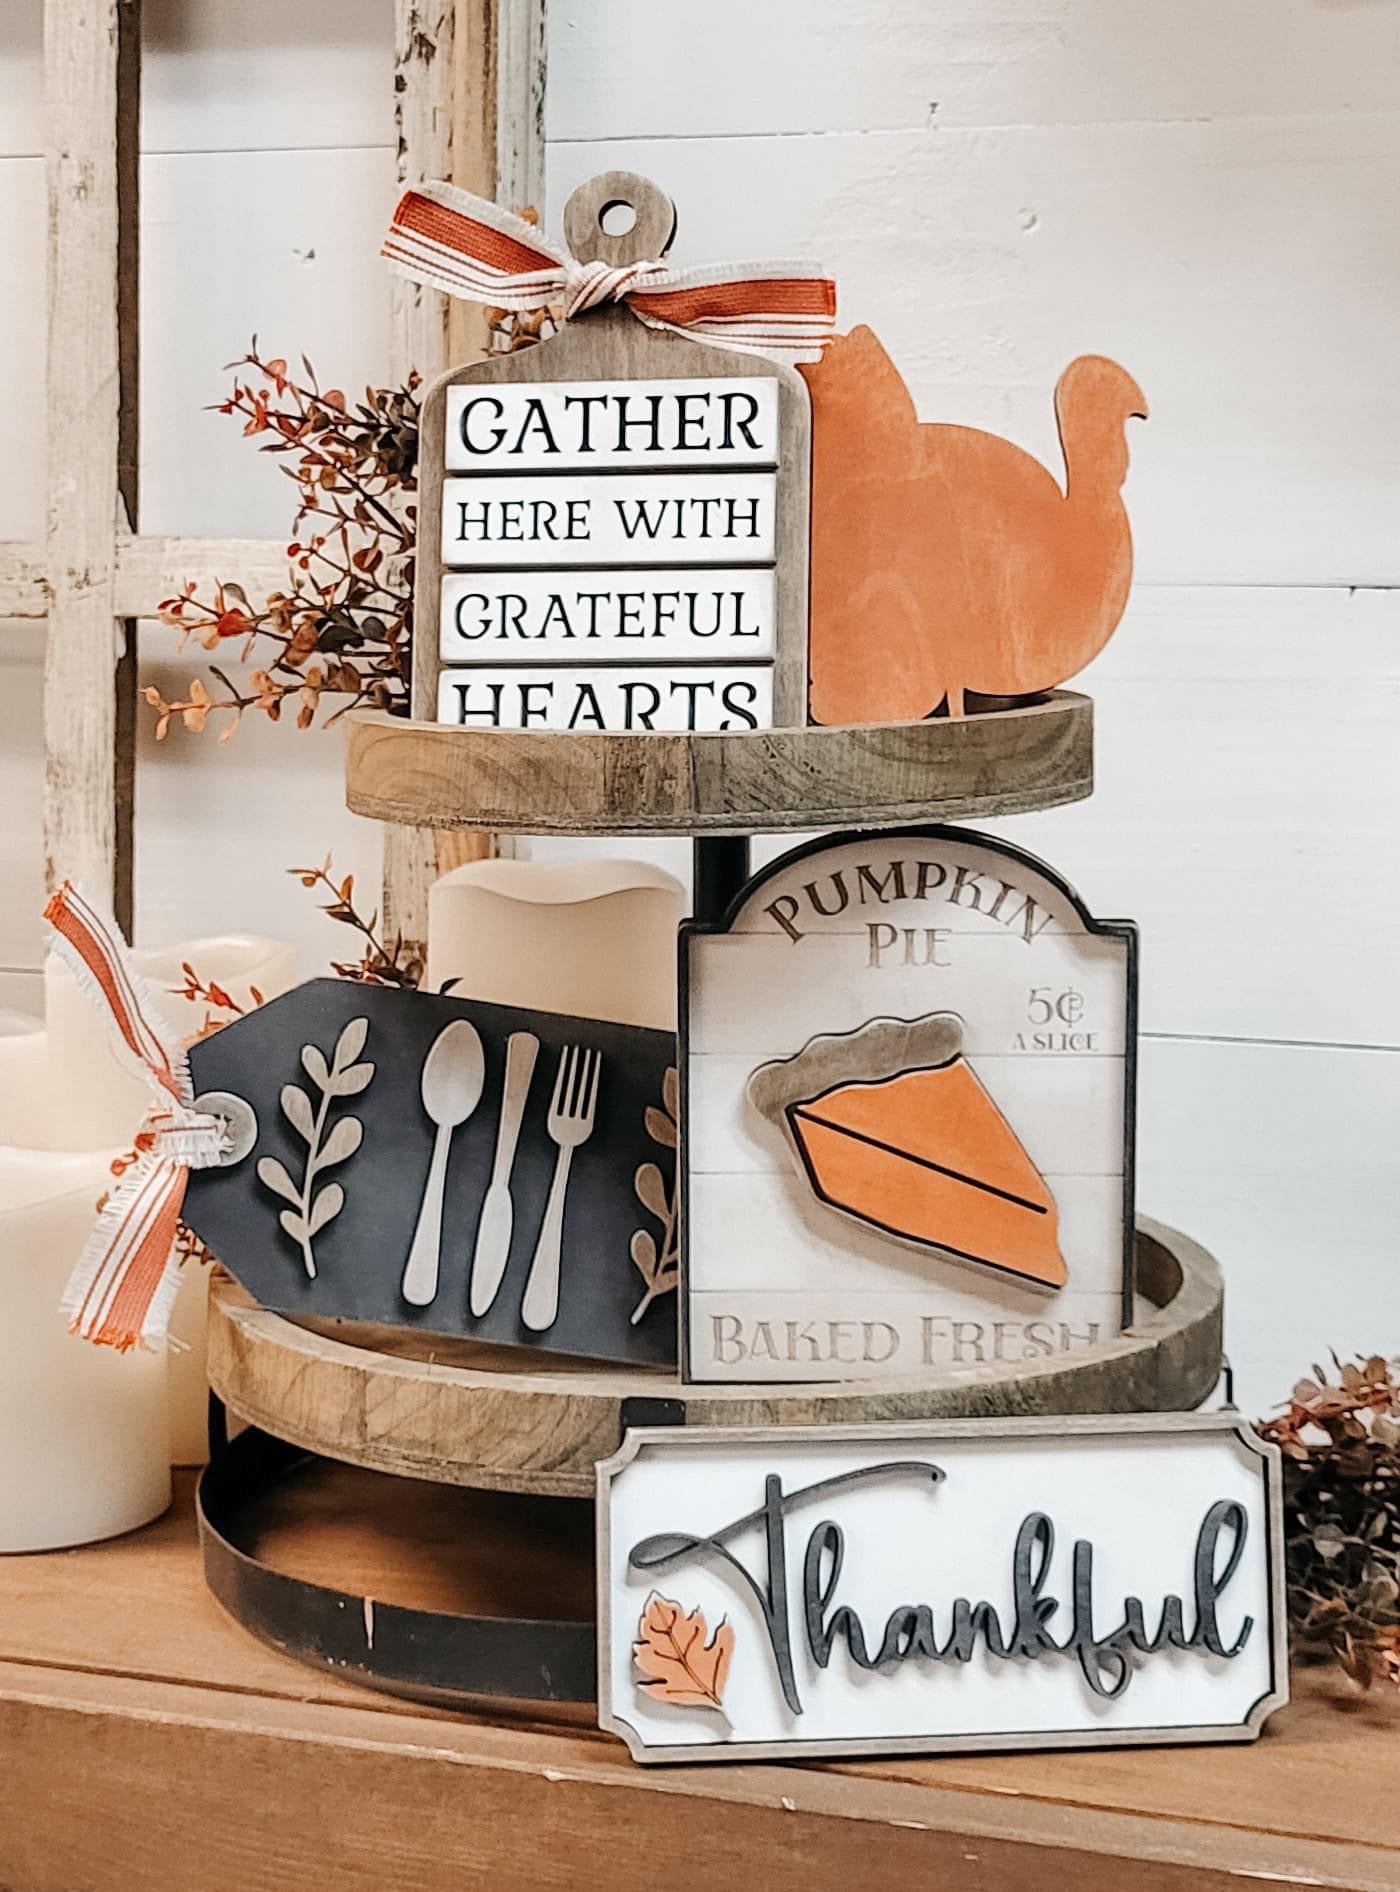 DIY Kit - Tiered Tray - Gather here with grateful hearts